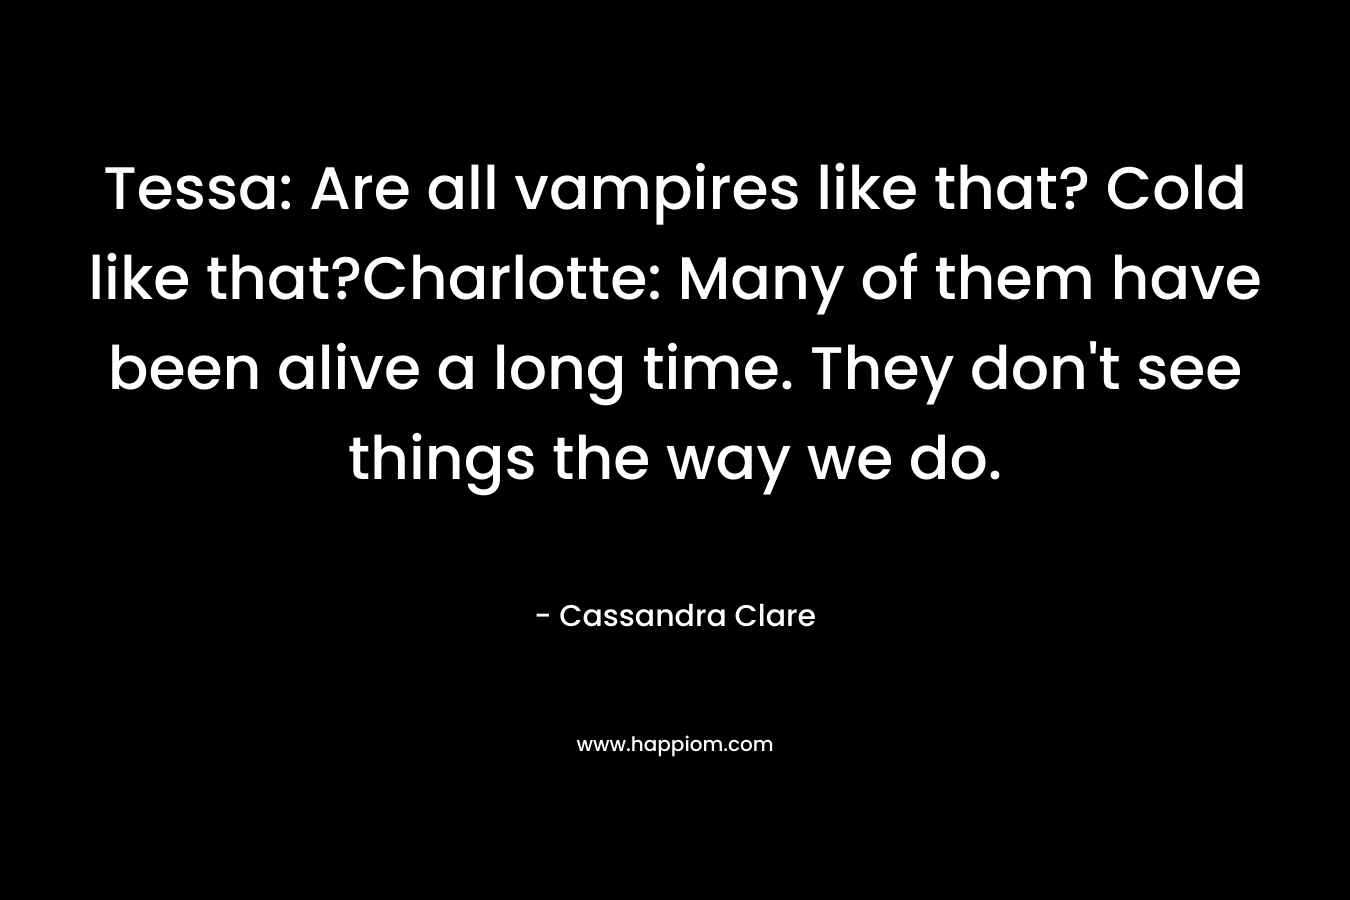 Tessa: Are all vampires like that? Cold like that?Charlotte: Many of them have been alive a long time. They don't see things the way we do.